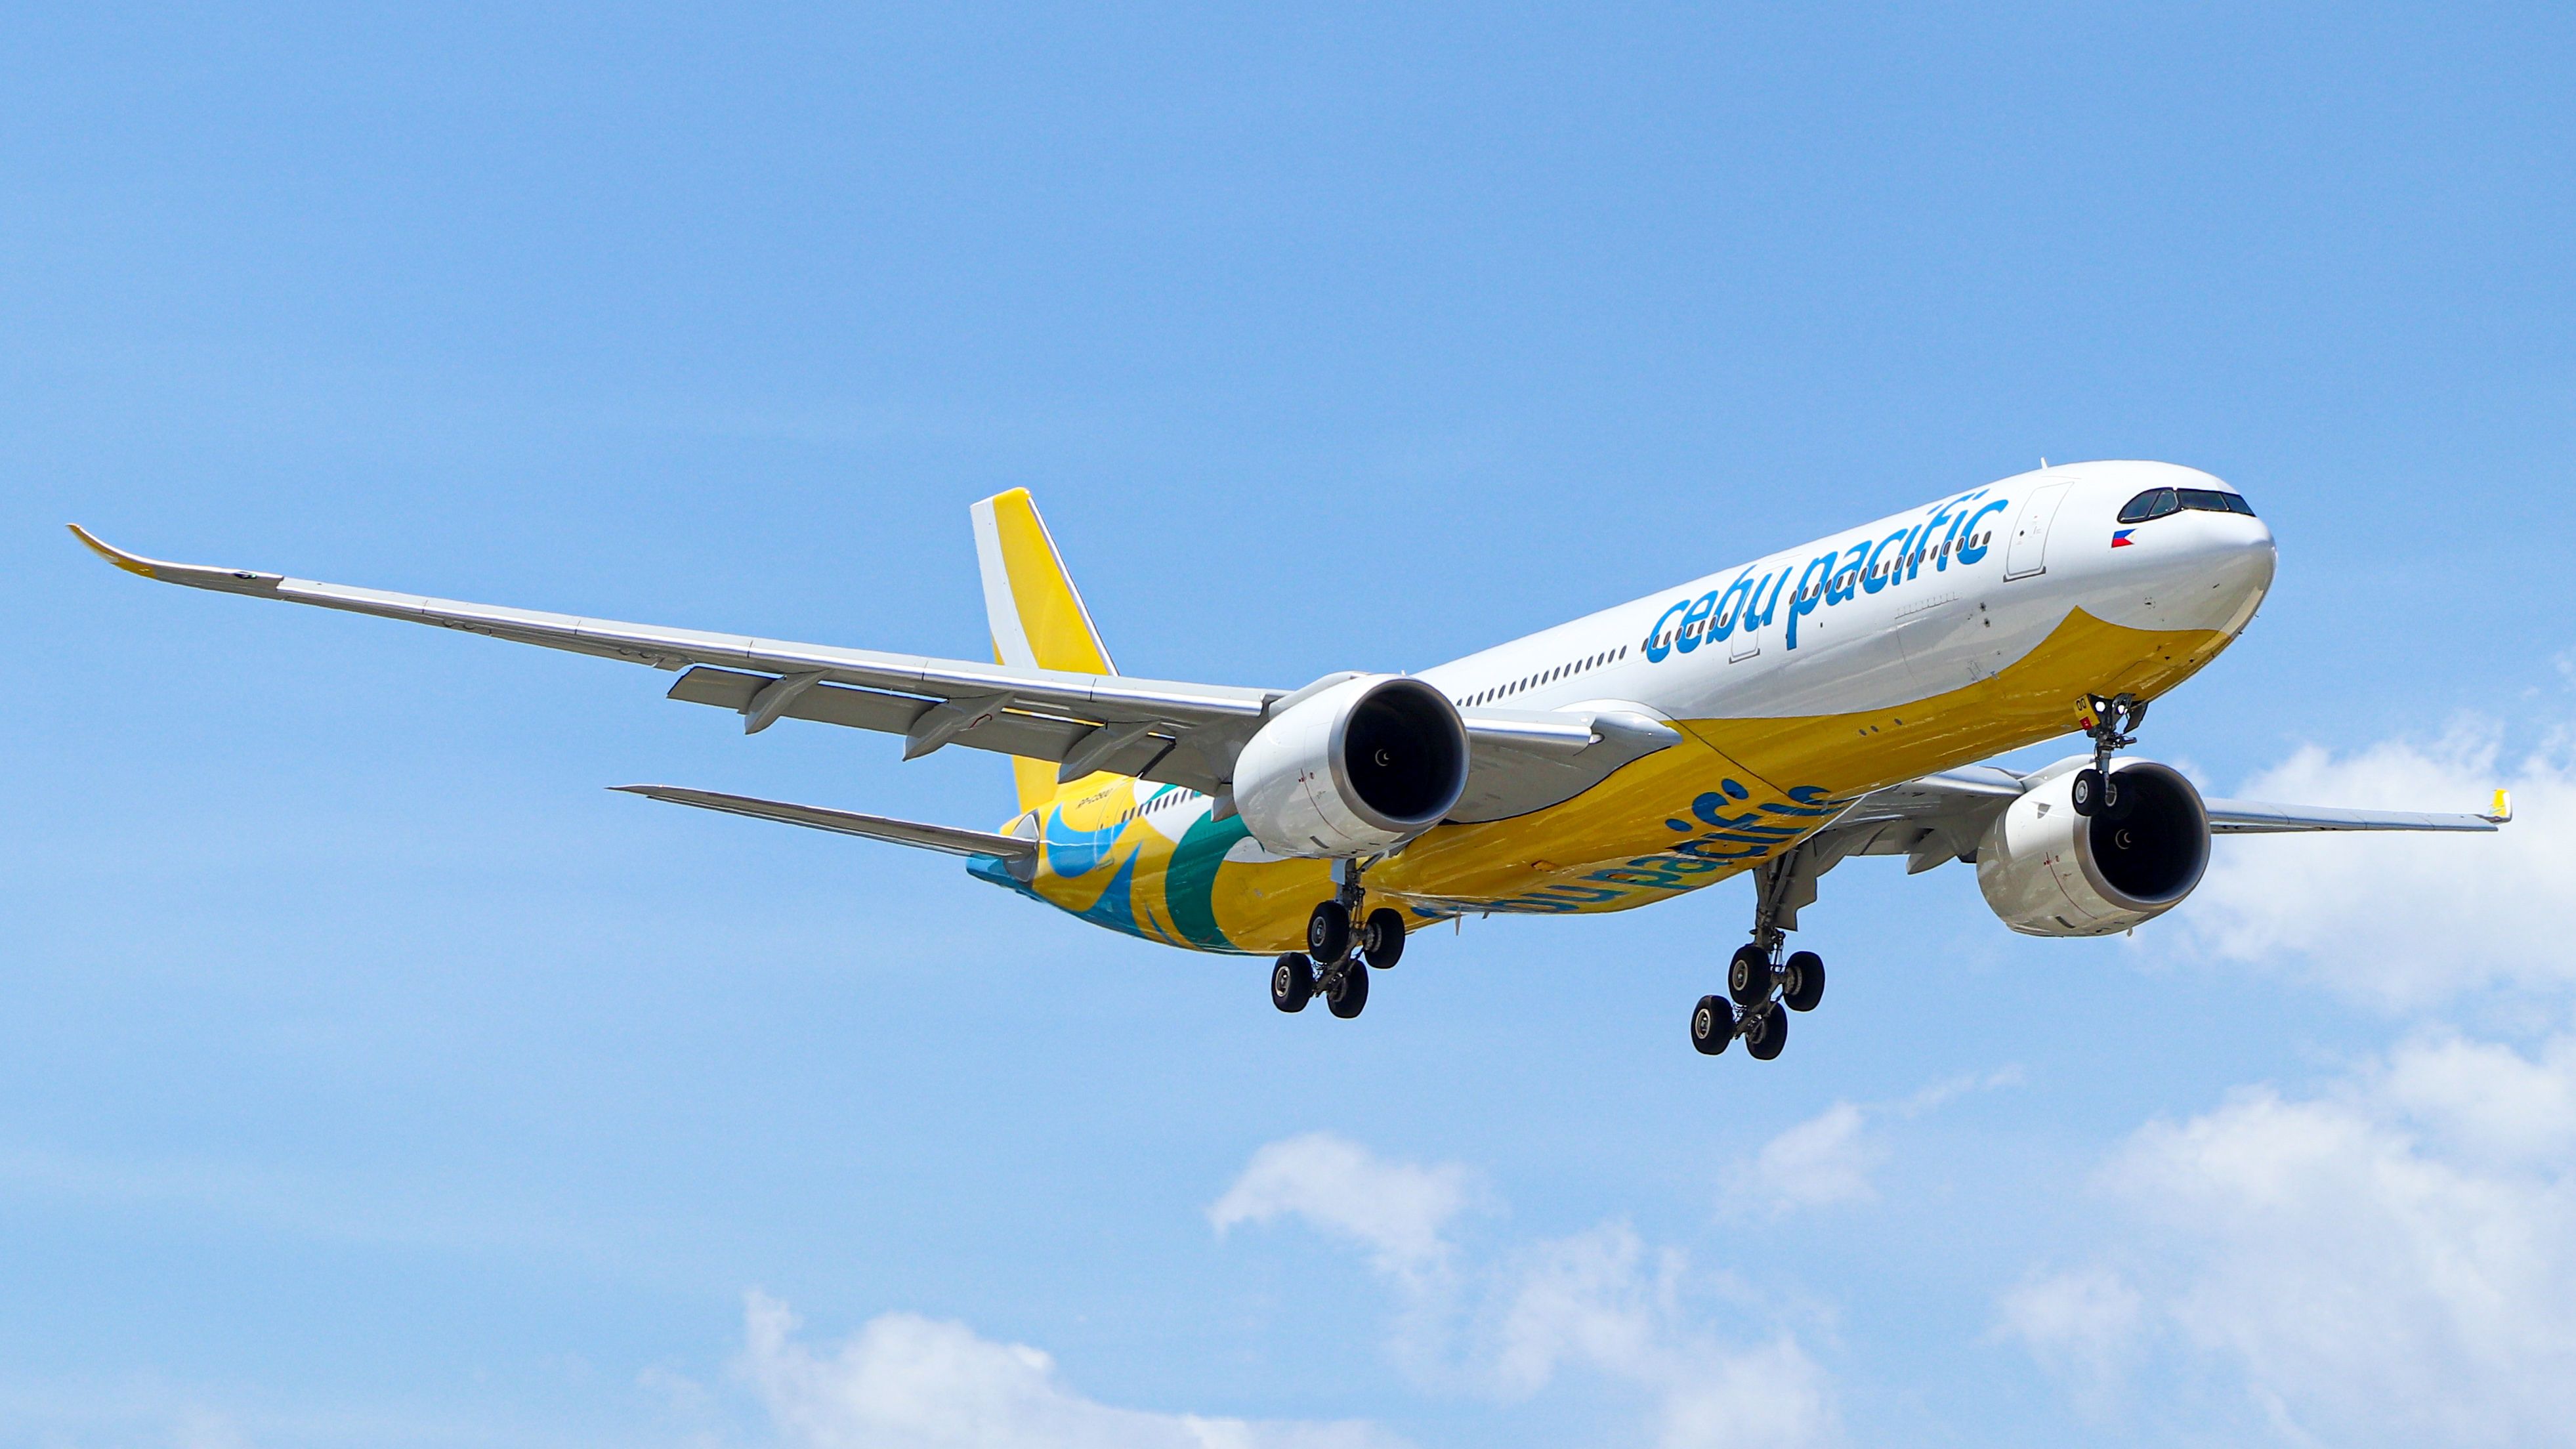 A Cebu Pacific Airbus A330neo flying in the sky.